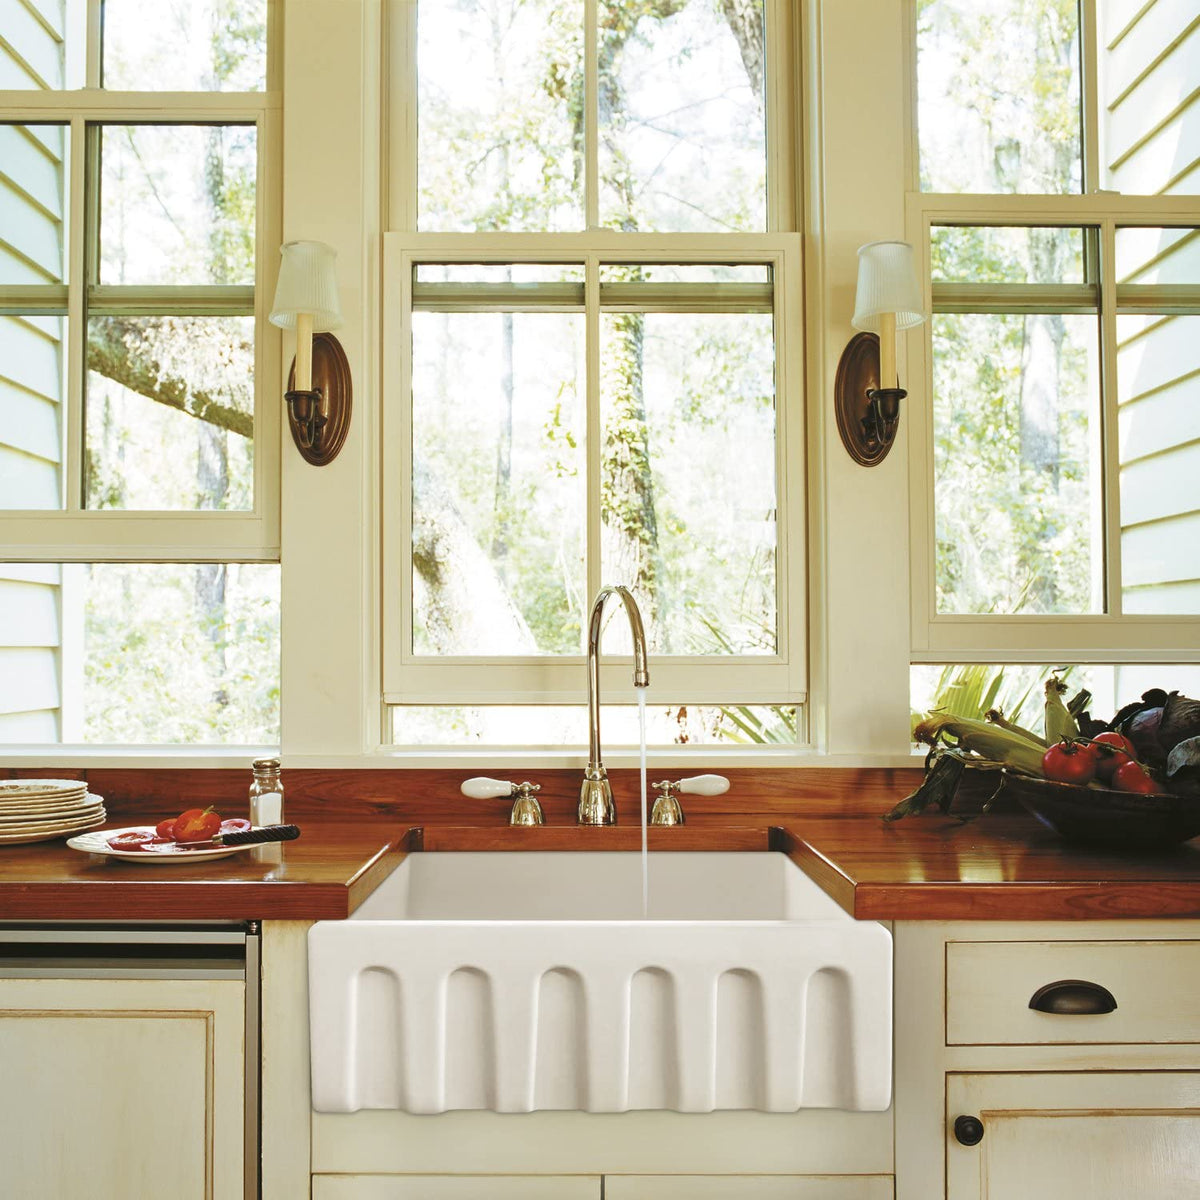 White and Wood Kitchen - Imperial Kitchens and Baths, Inc. 708.485